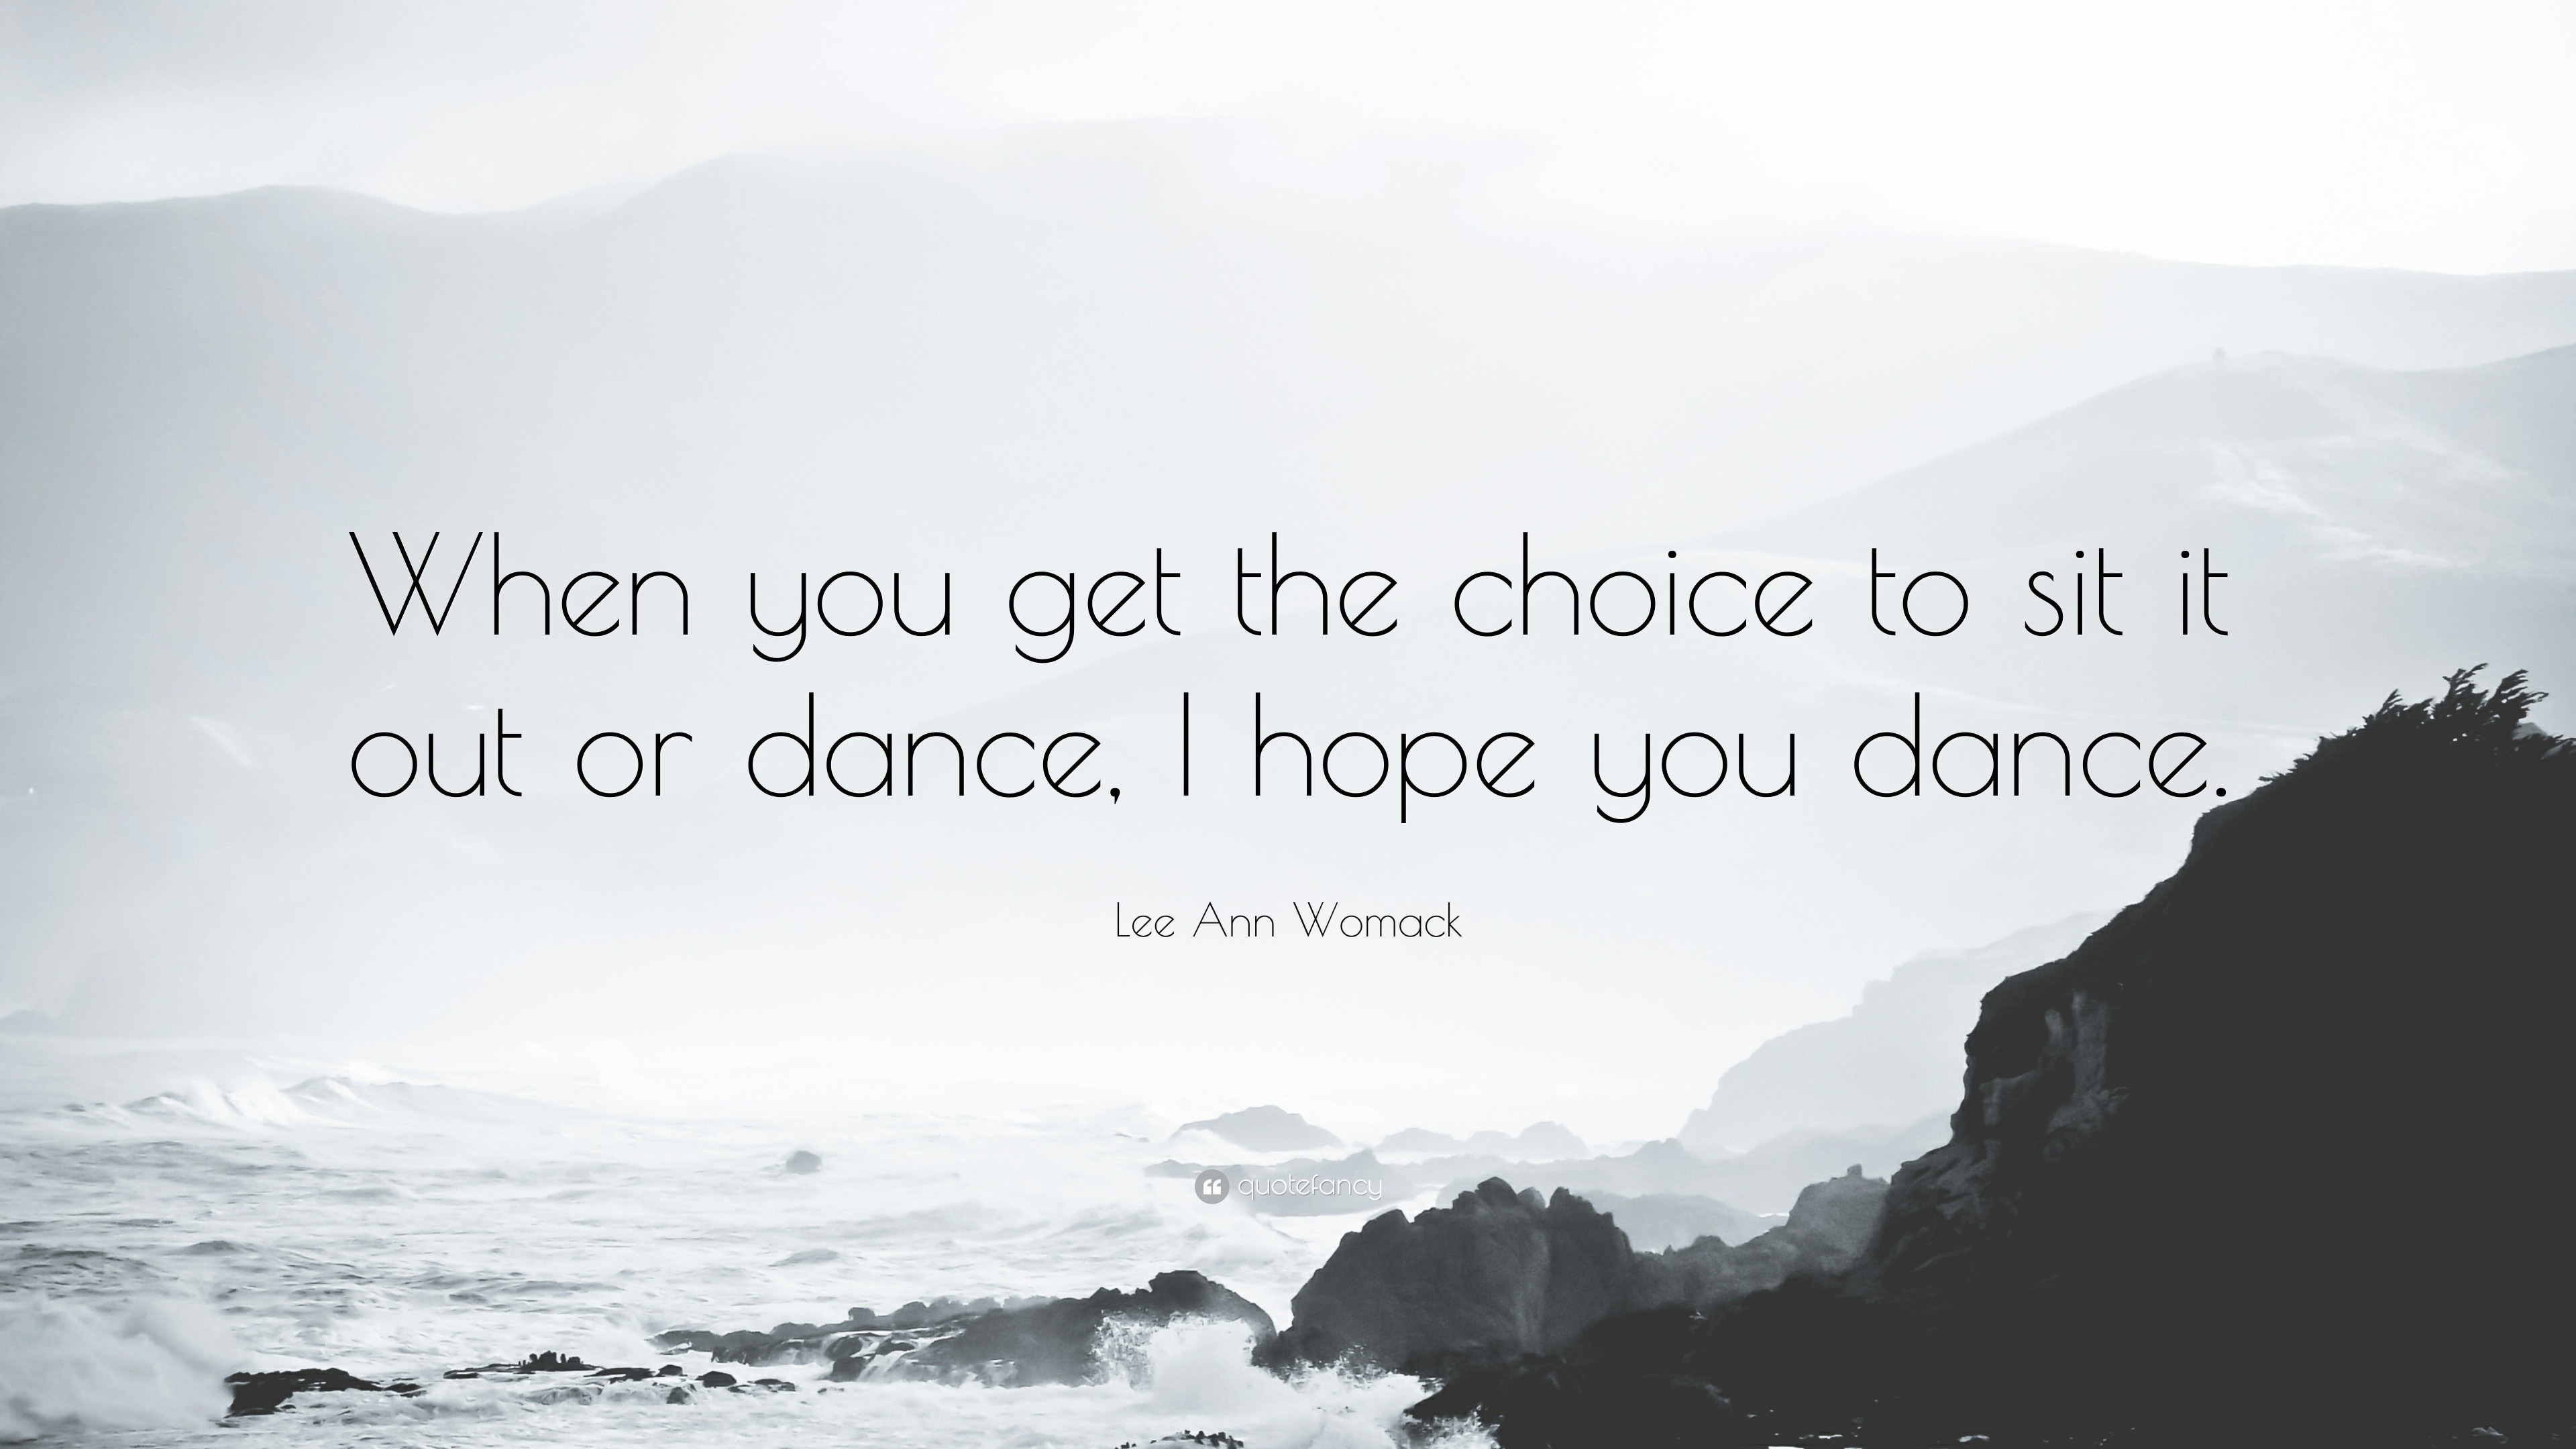 Download 62+ Dance Quotes Wallpaper For Iphone Terbaik - Posts.id